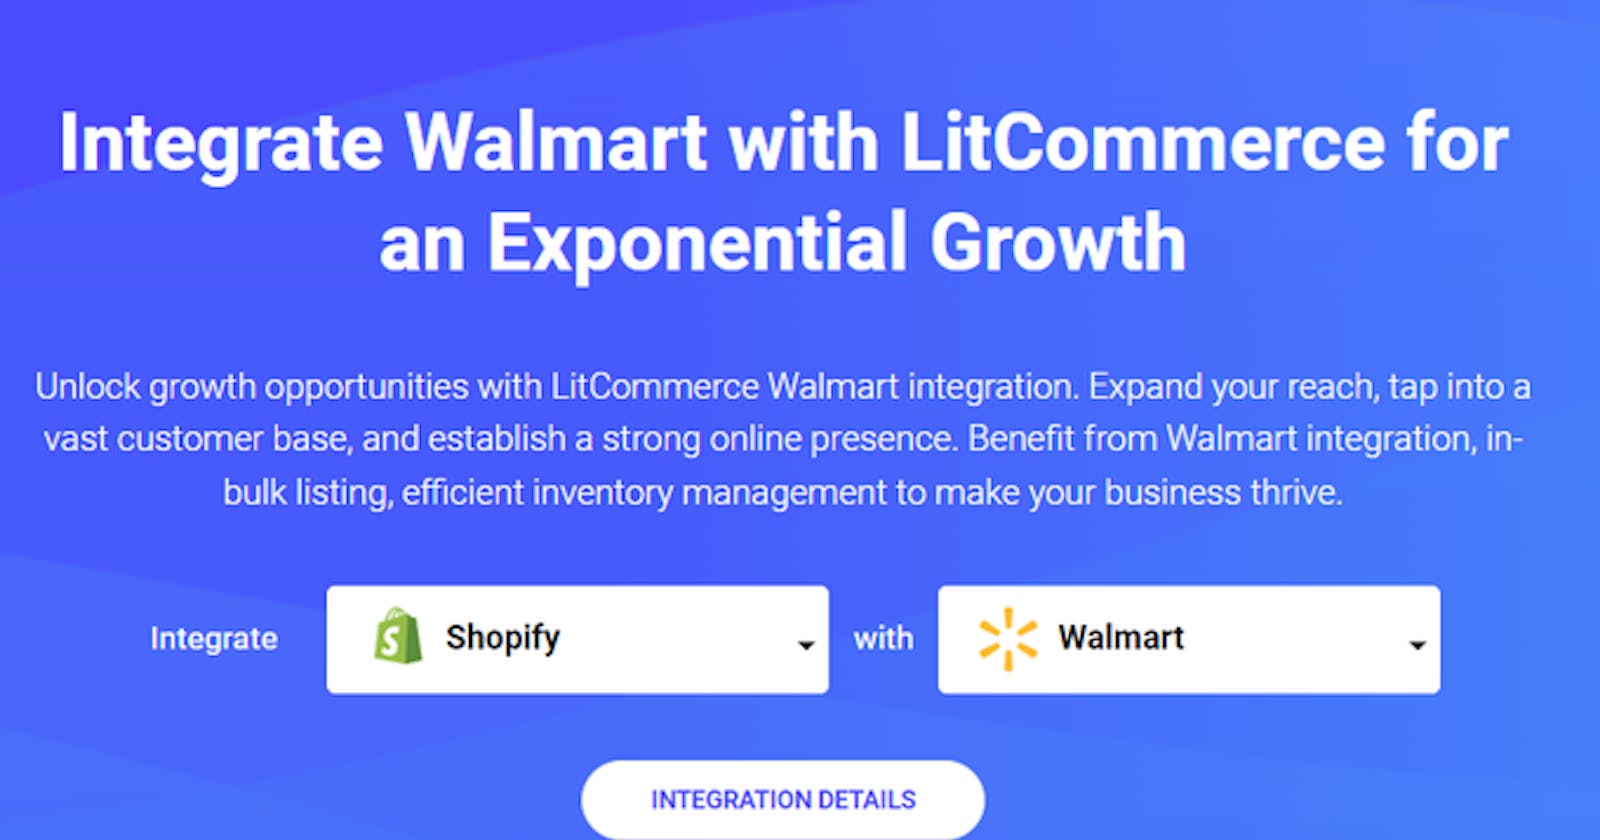 Try Free Plan of LitCommerce to integrate with Walmart